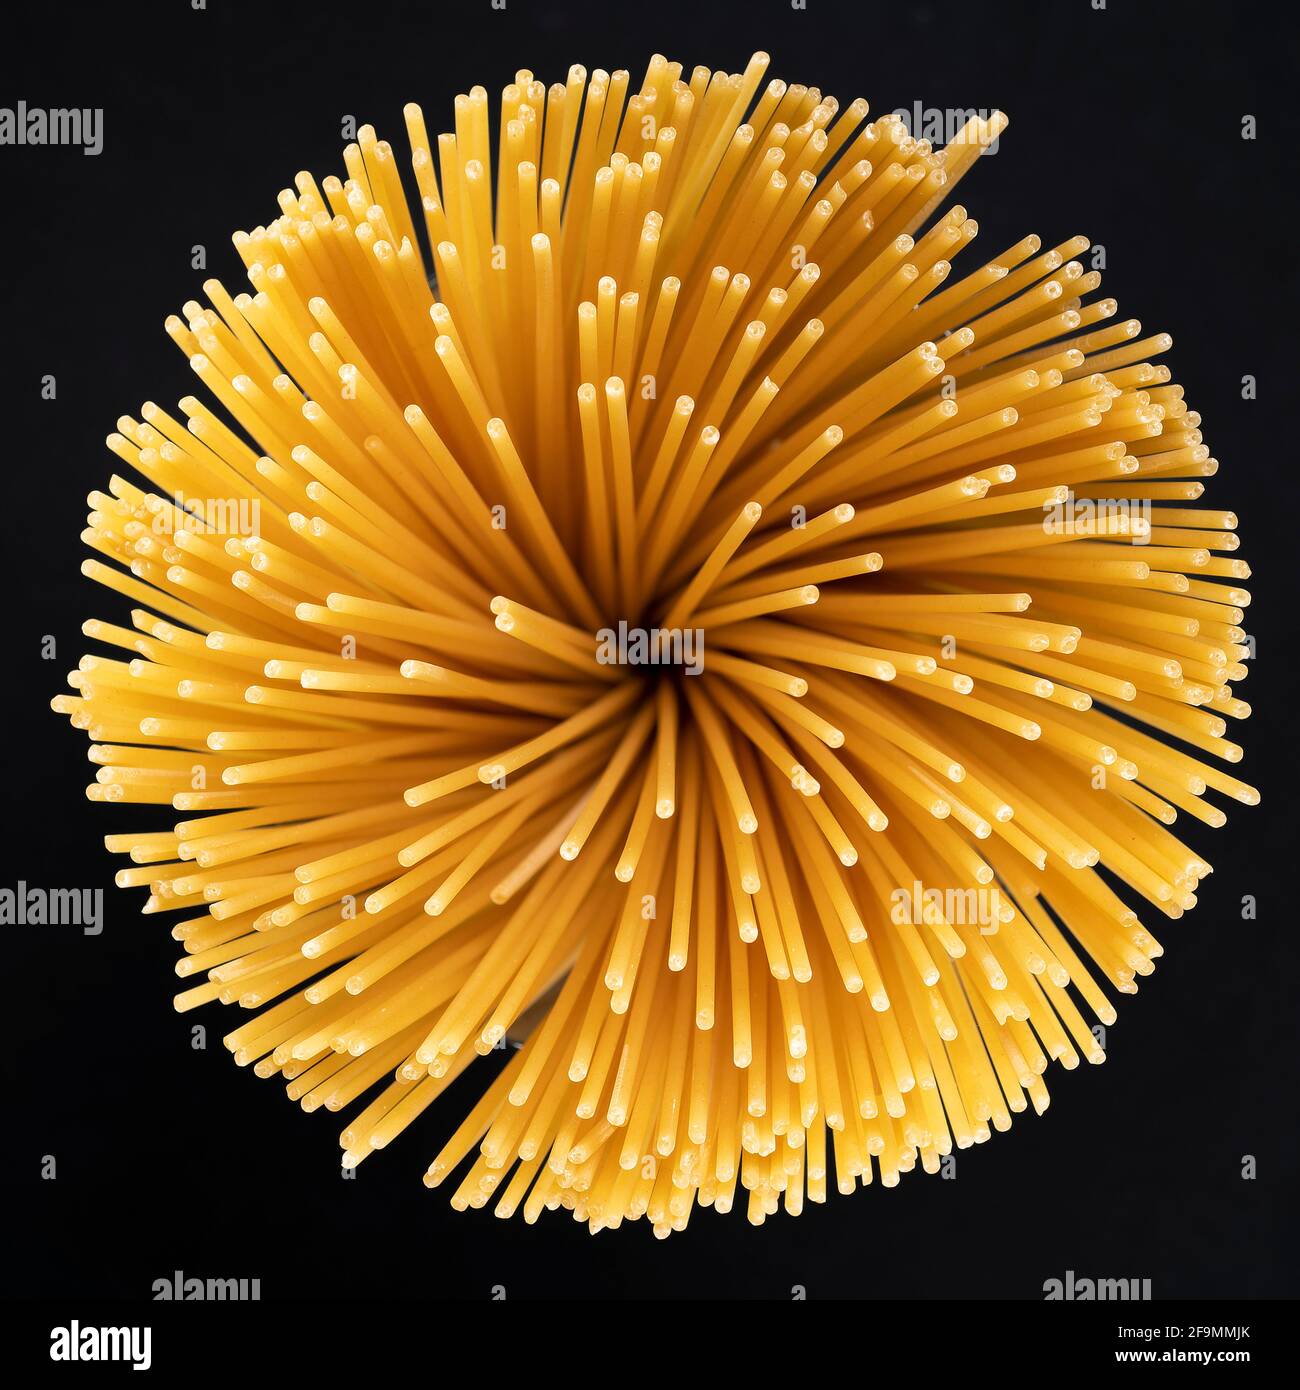 Abstract image of spaghetti, view from above Stock Photo